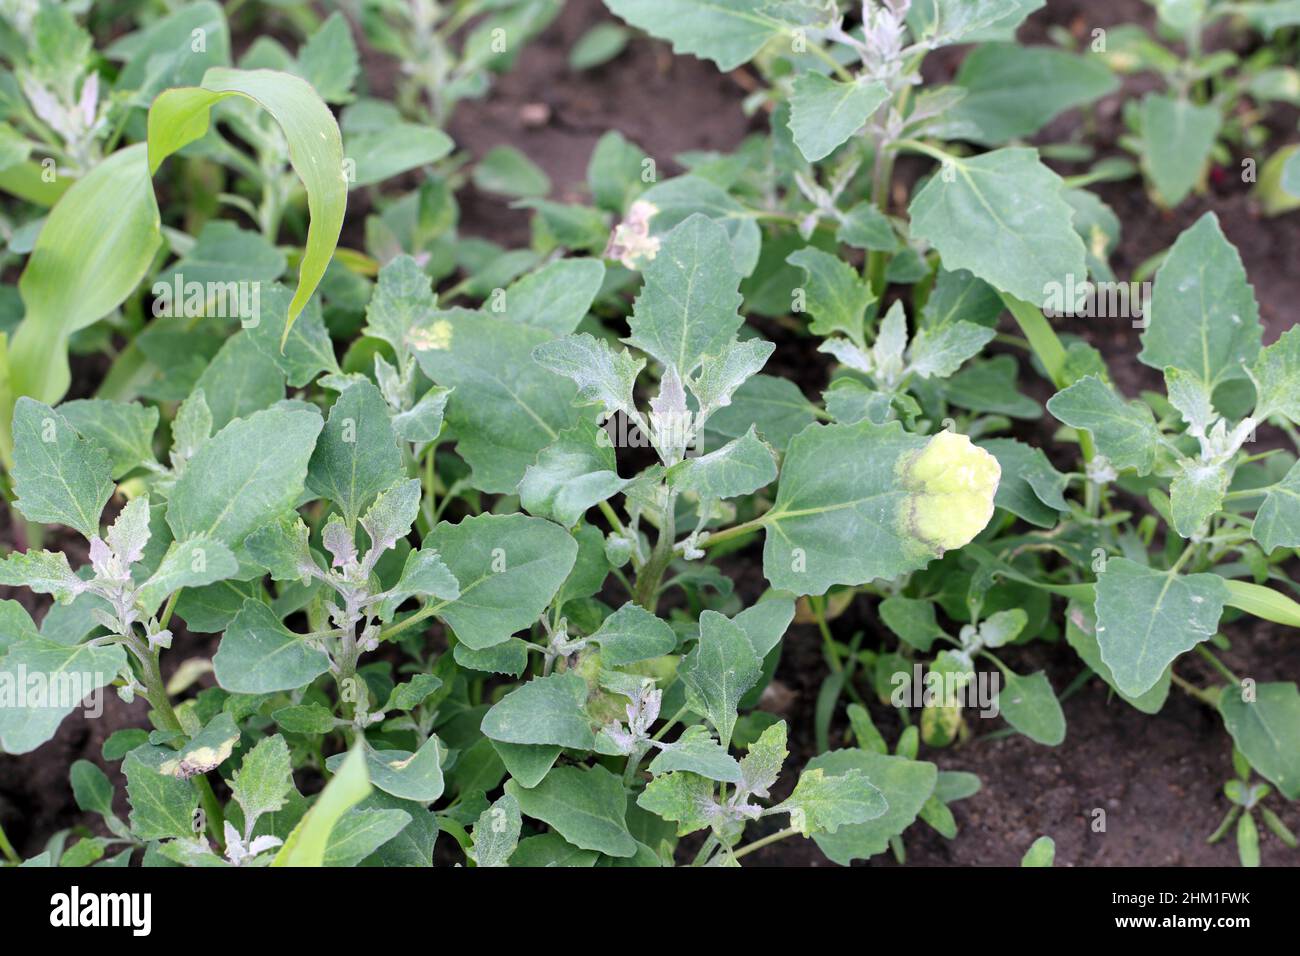 Gray mold on weed Chenopodium album - common names include lamb's quarters, melde, goosefoot, manure weed. Source of infection for crop plants. Stock Photo